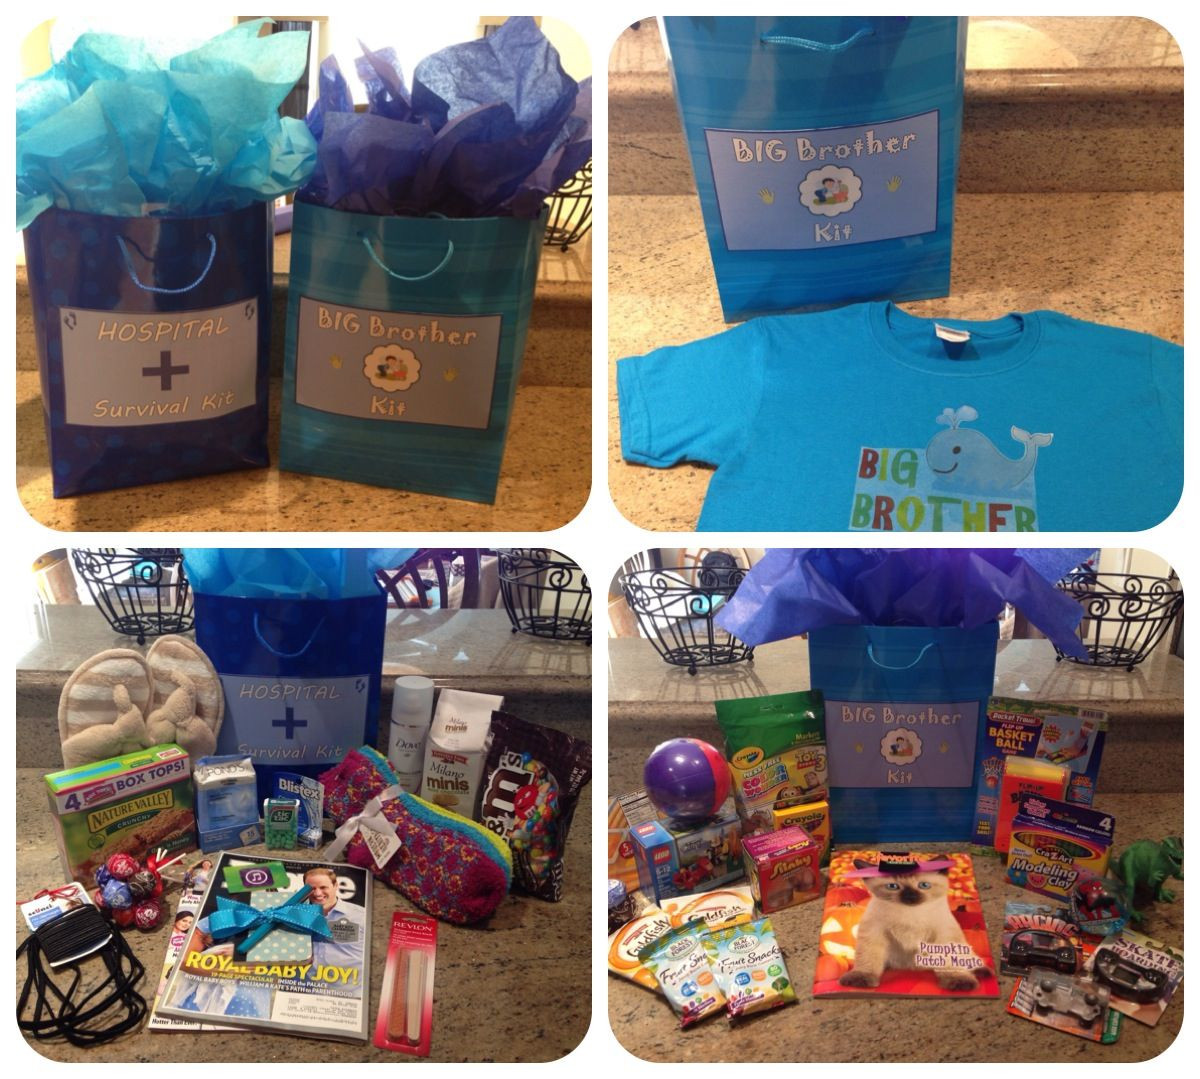 Gift Ideas For Big Brother From New Baby
 Hospital Survival Kit and Big Brother Kit for the big day